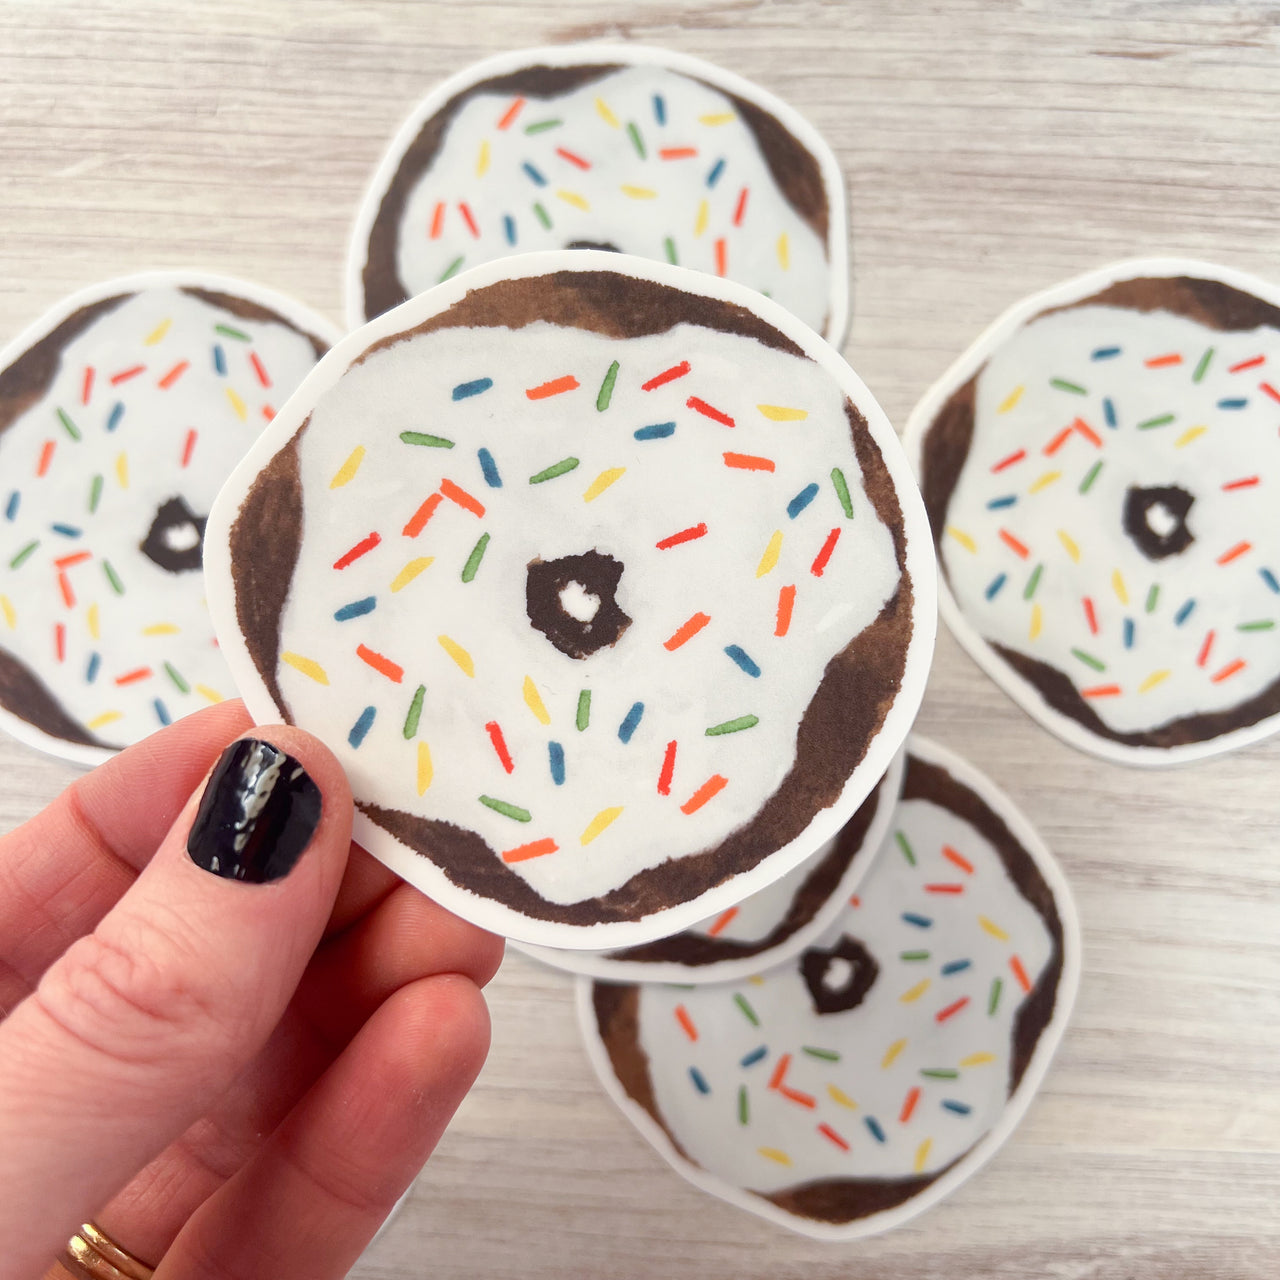 Frosted Chocolate Donut Sticker by Gert & Co